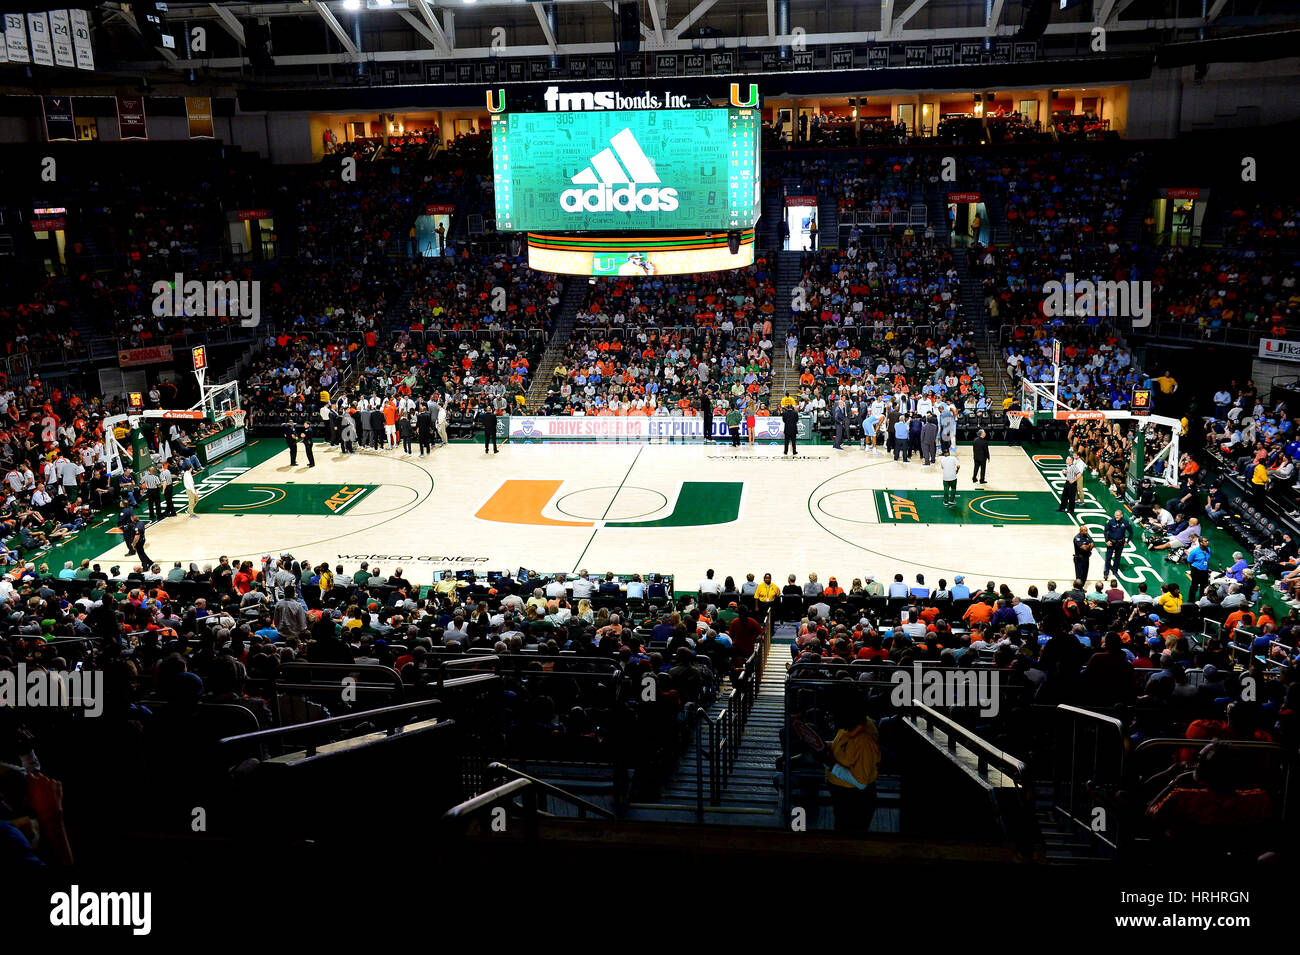 General view of the court during an ACC basketball game between the  University of Miami Hurricanes and North Carolina Tar Heels at the Watsco  Center in Coral Gables, Florida. Miami defeated North